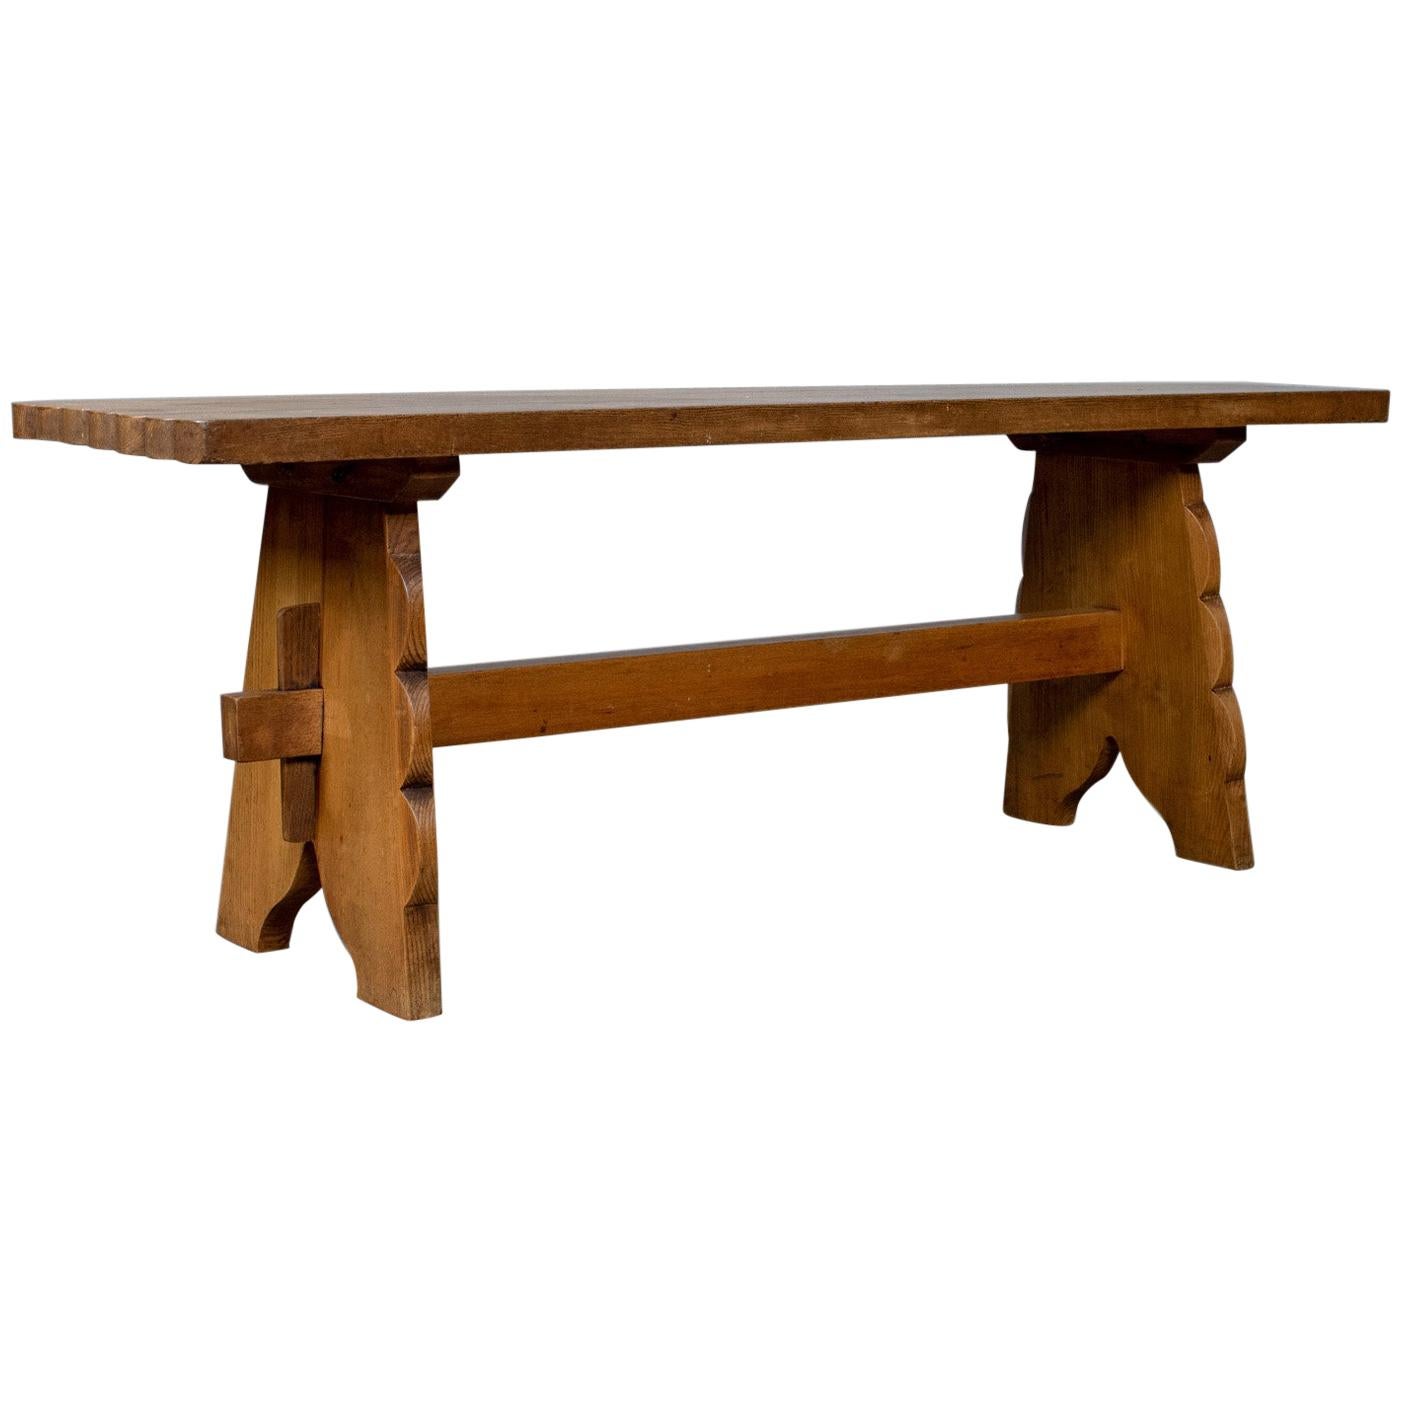 Arts & Crafts Oak Bench, English, Early 20th Century, Two-Seat Form